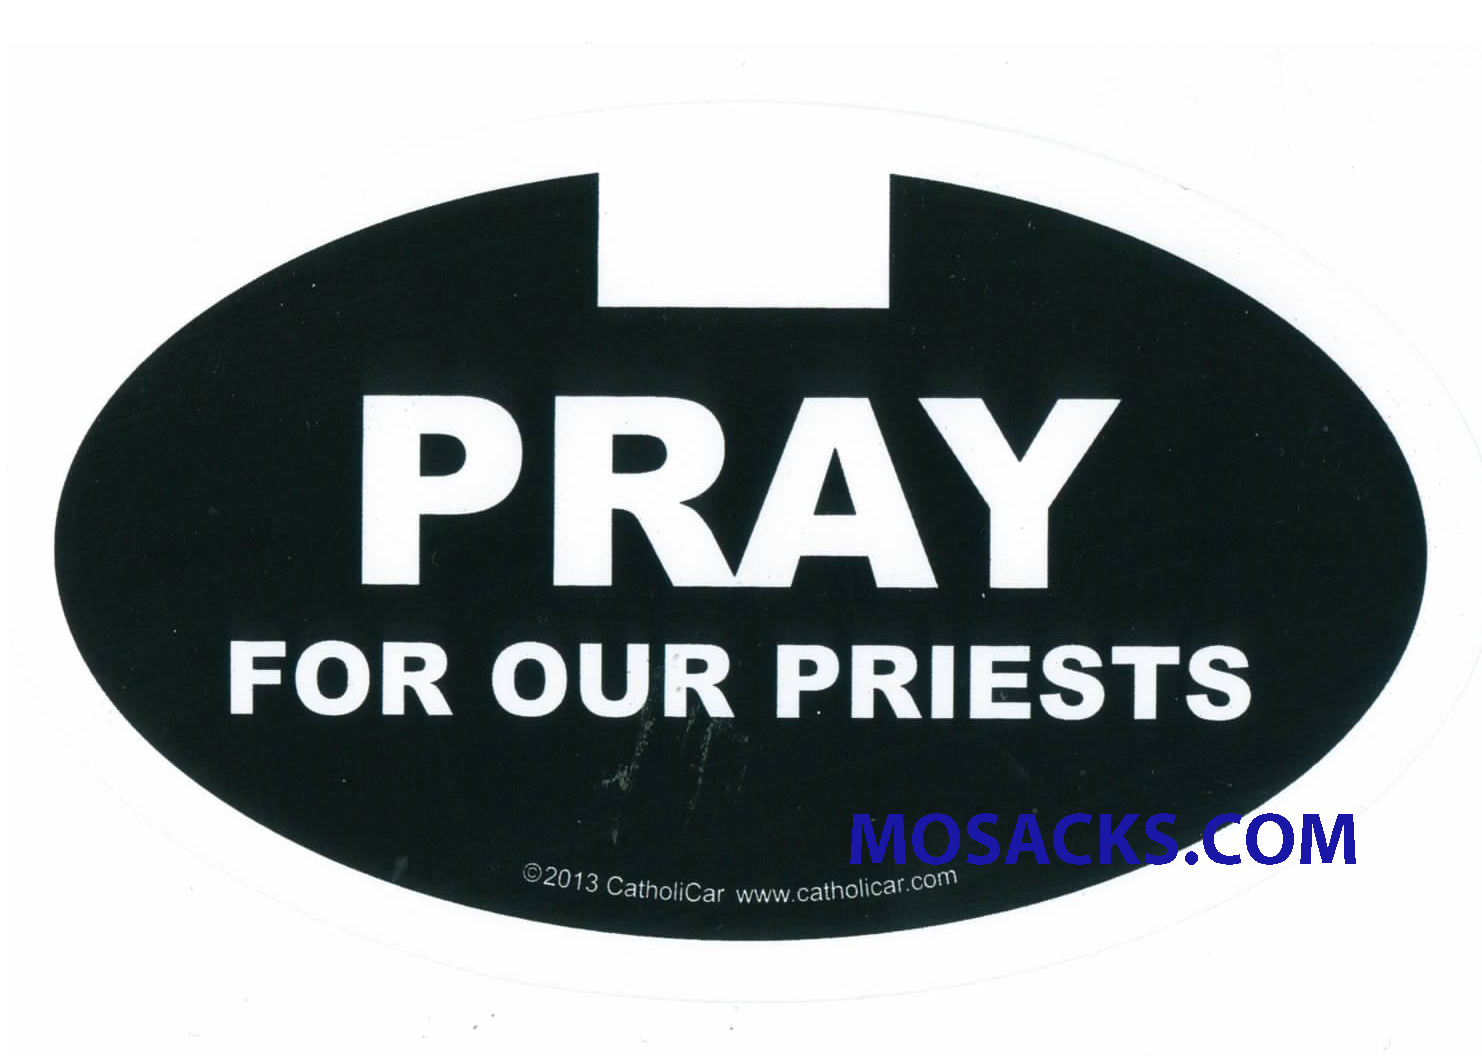 Pray For Our Priests Window Decal CCE04 Christian Window Decal, Catholic Window Decal